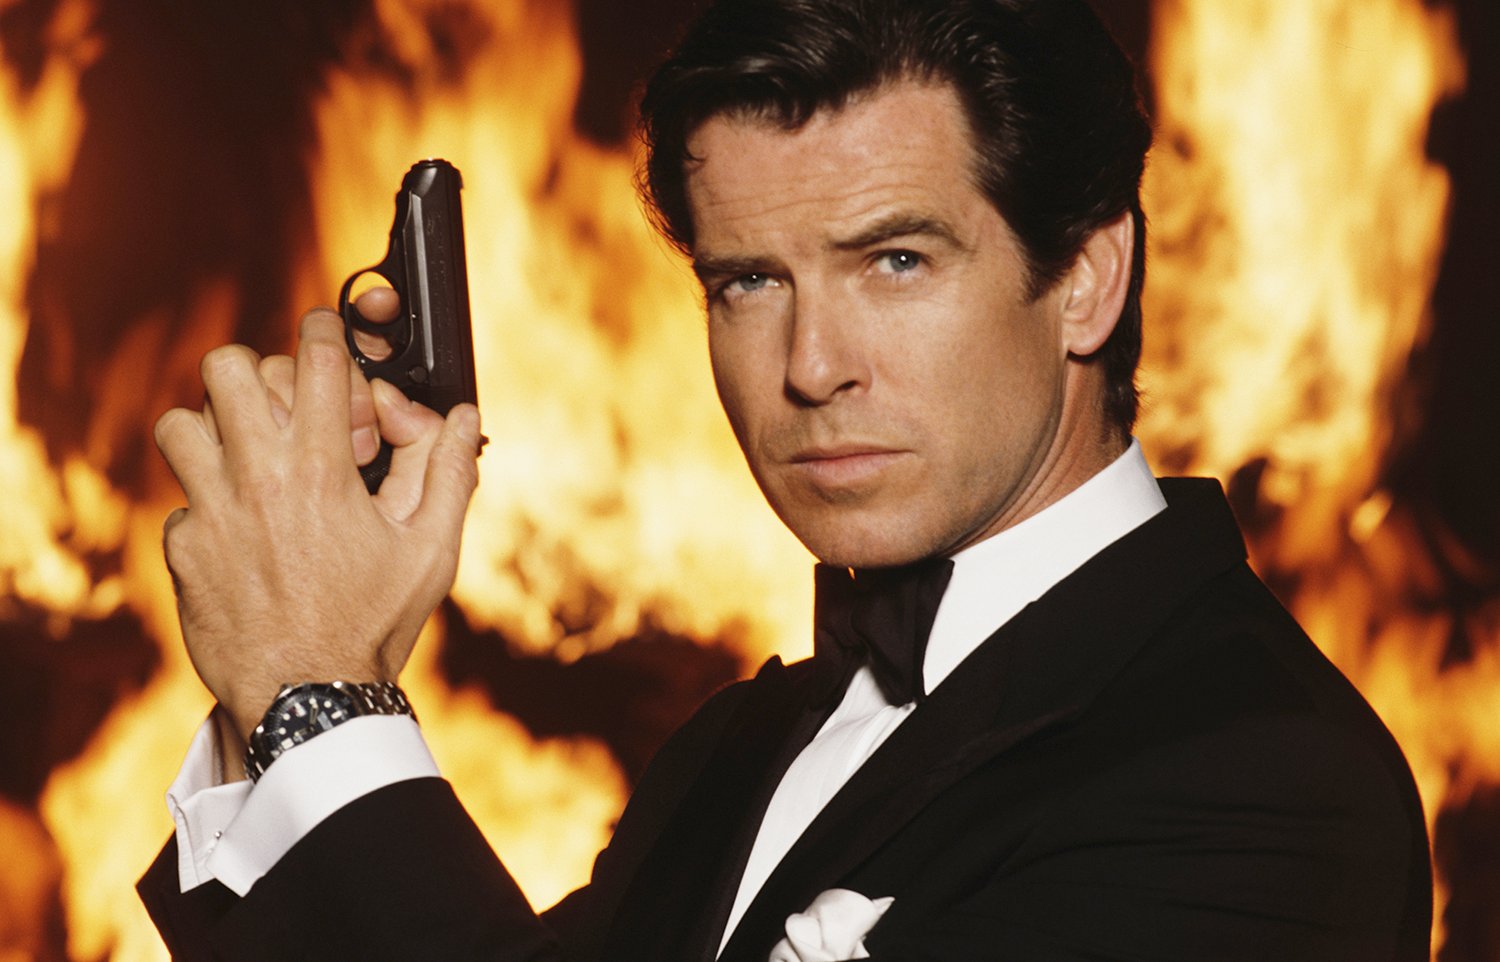 A version of the 'GoldenEye 007' Xbox remaster has been leaked online